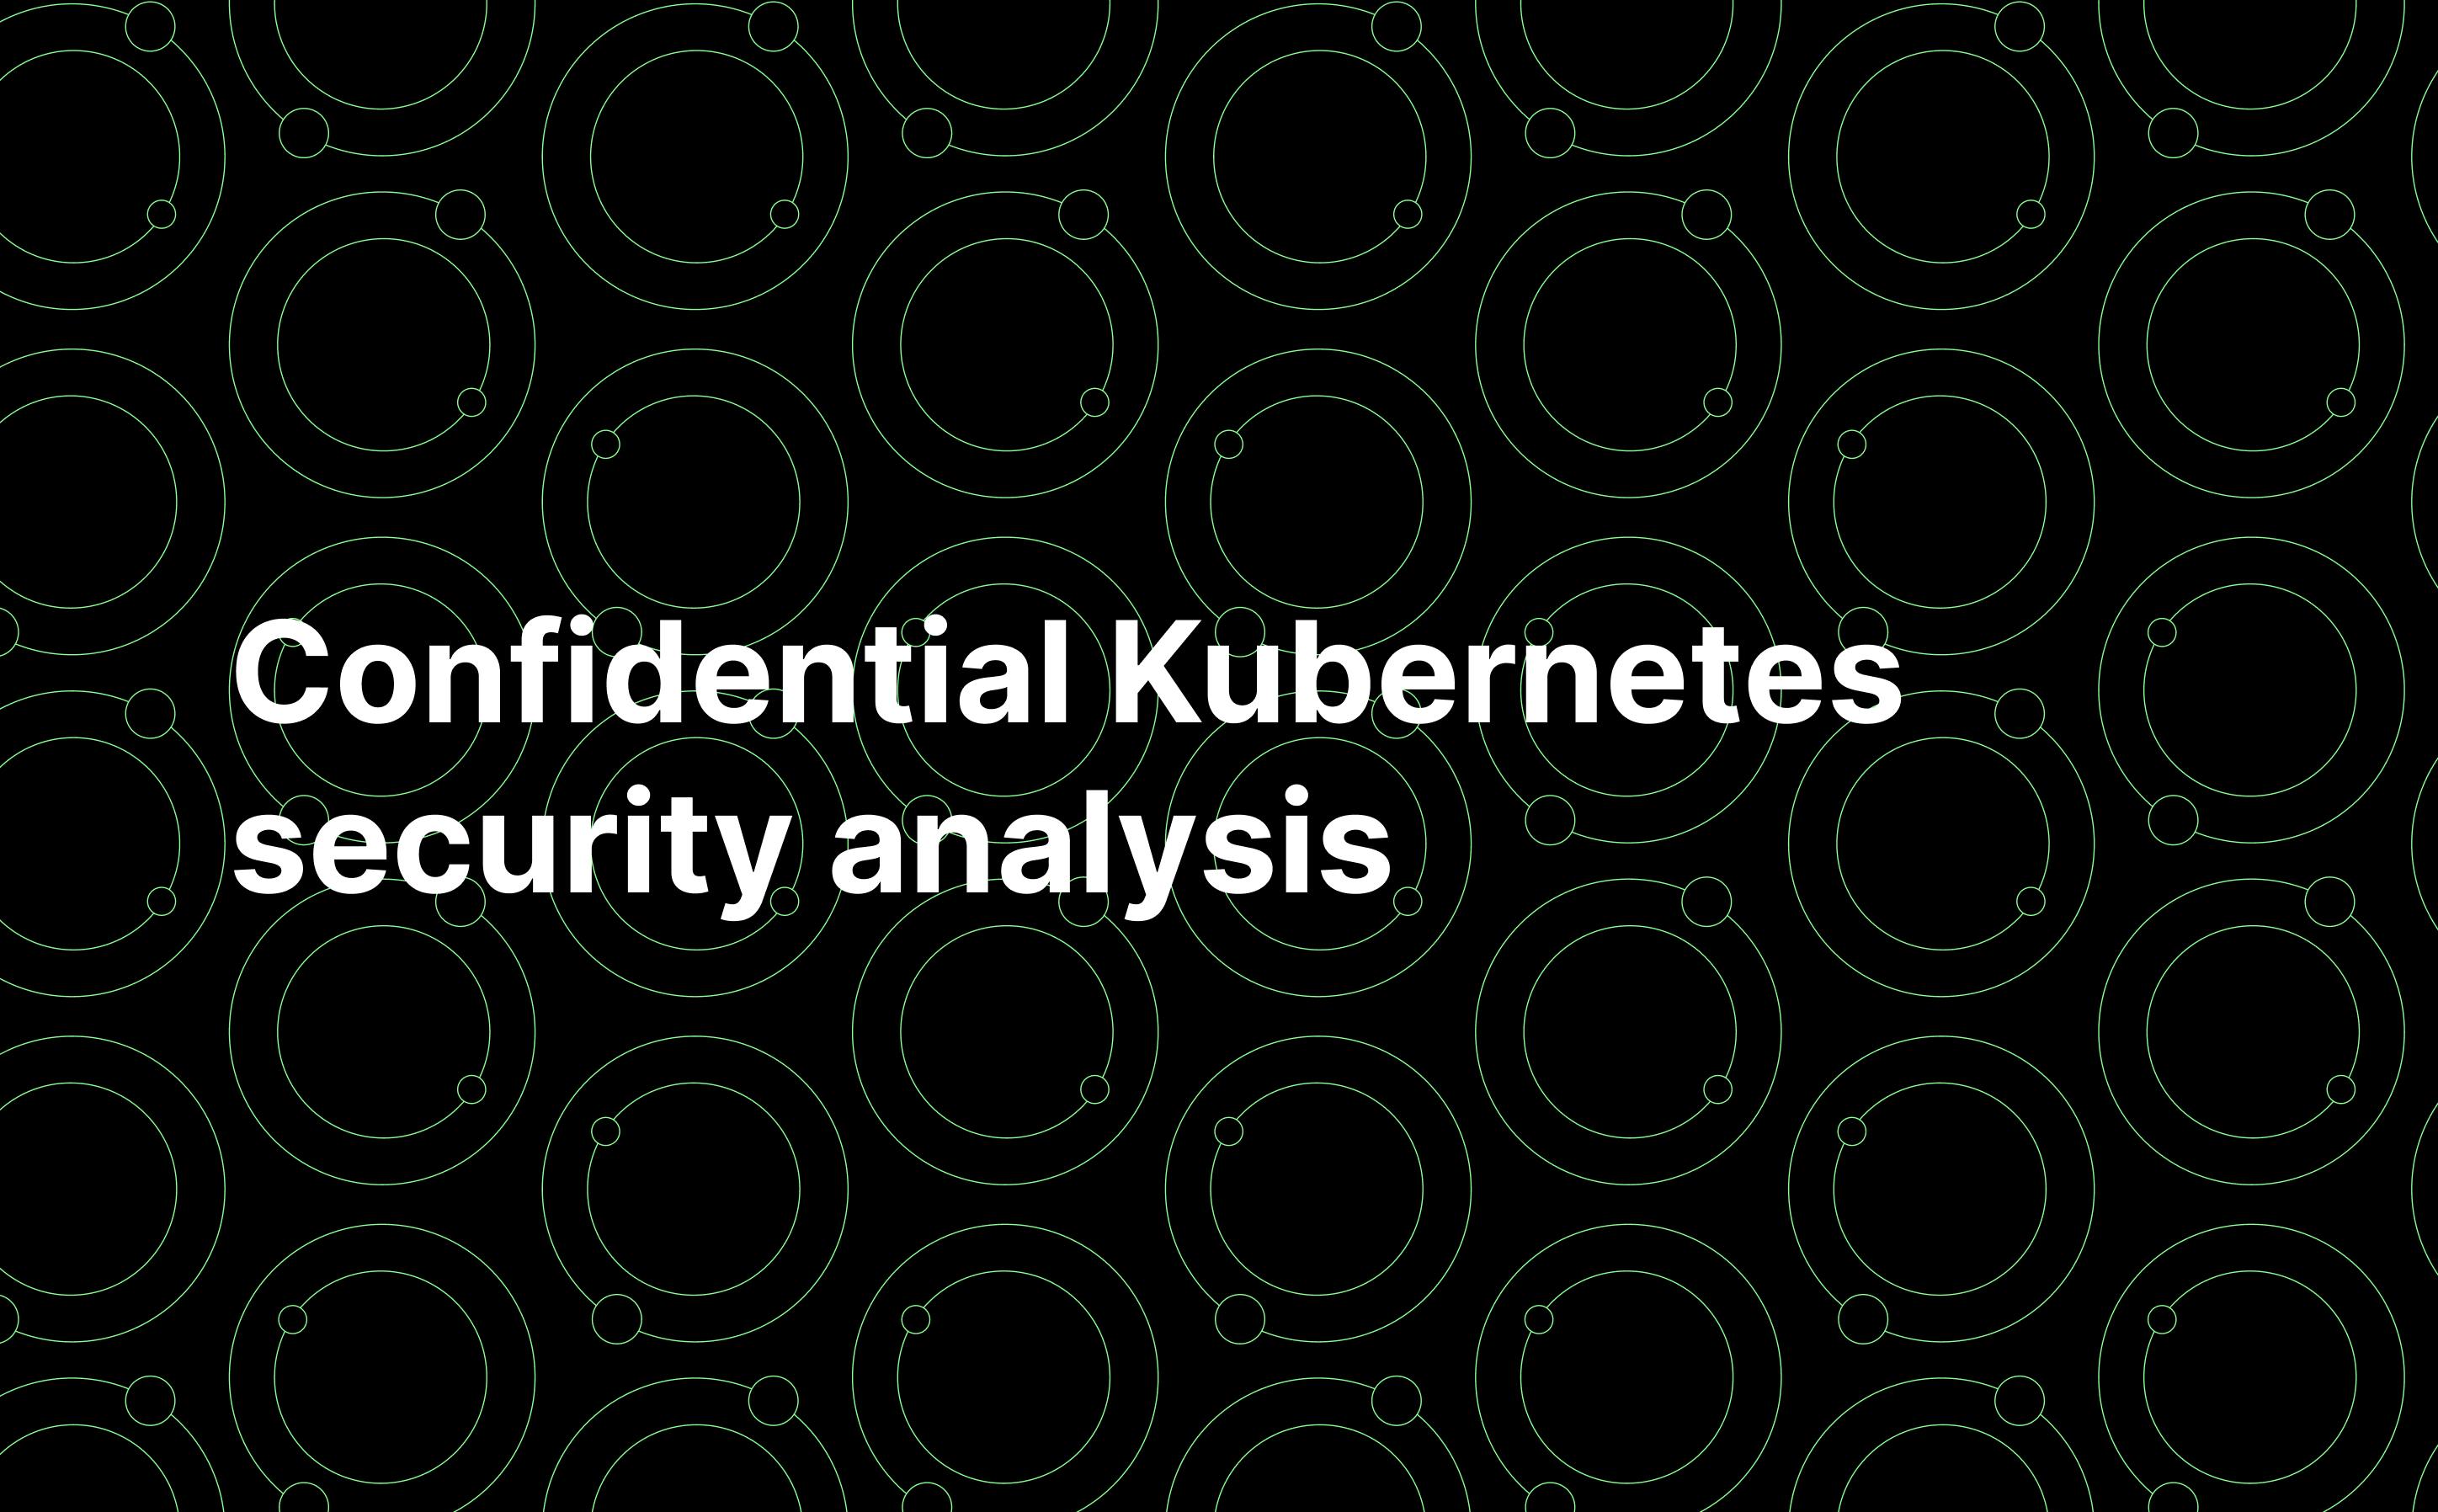 Confidential Kubernetes security analysis